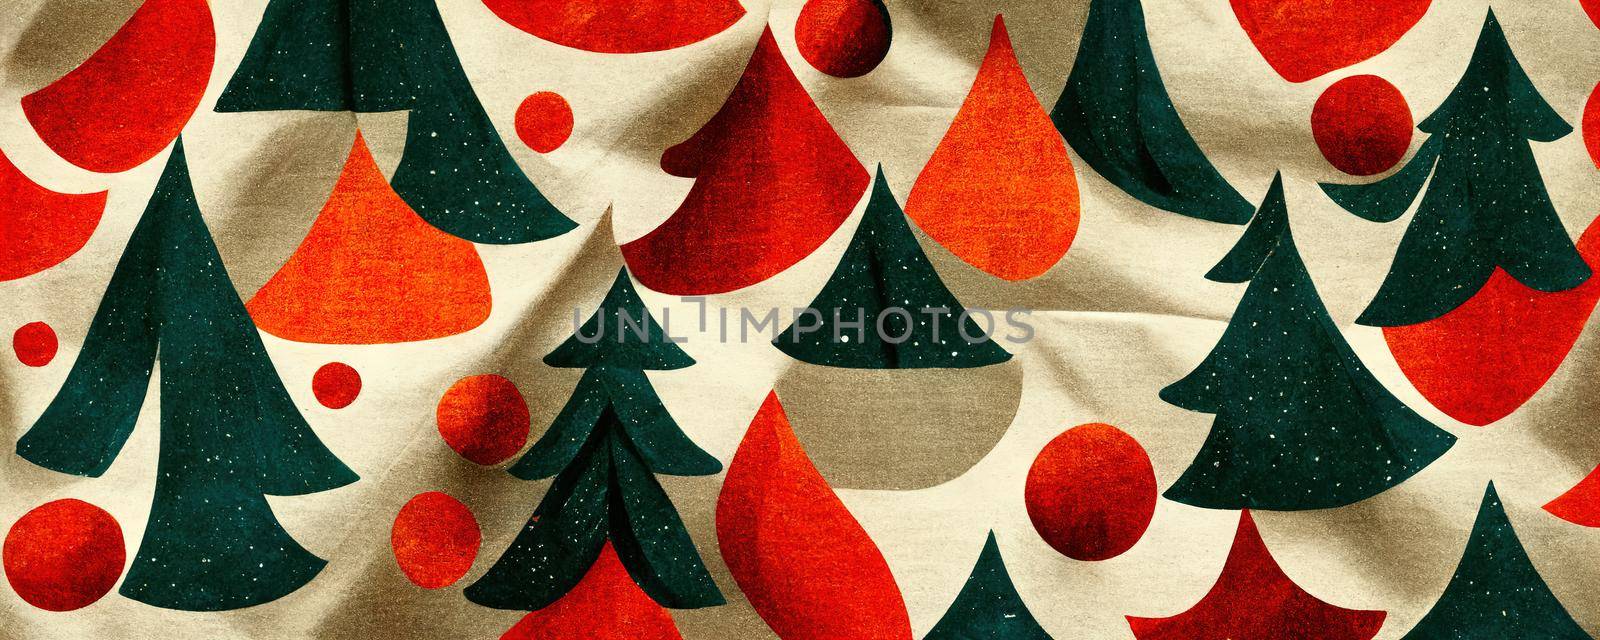 christmas fabric with trees, Colorful abstract wallpaper texture background illustration by TRMK